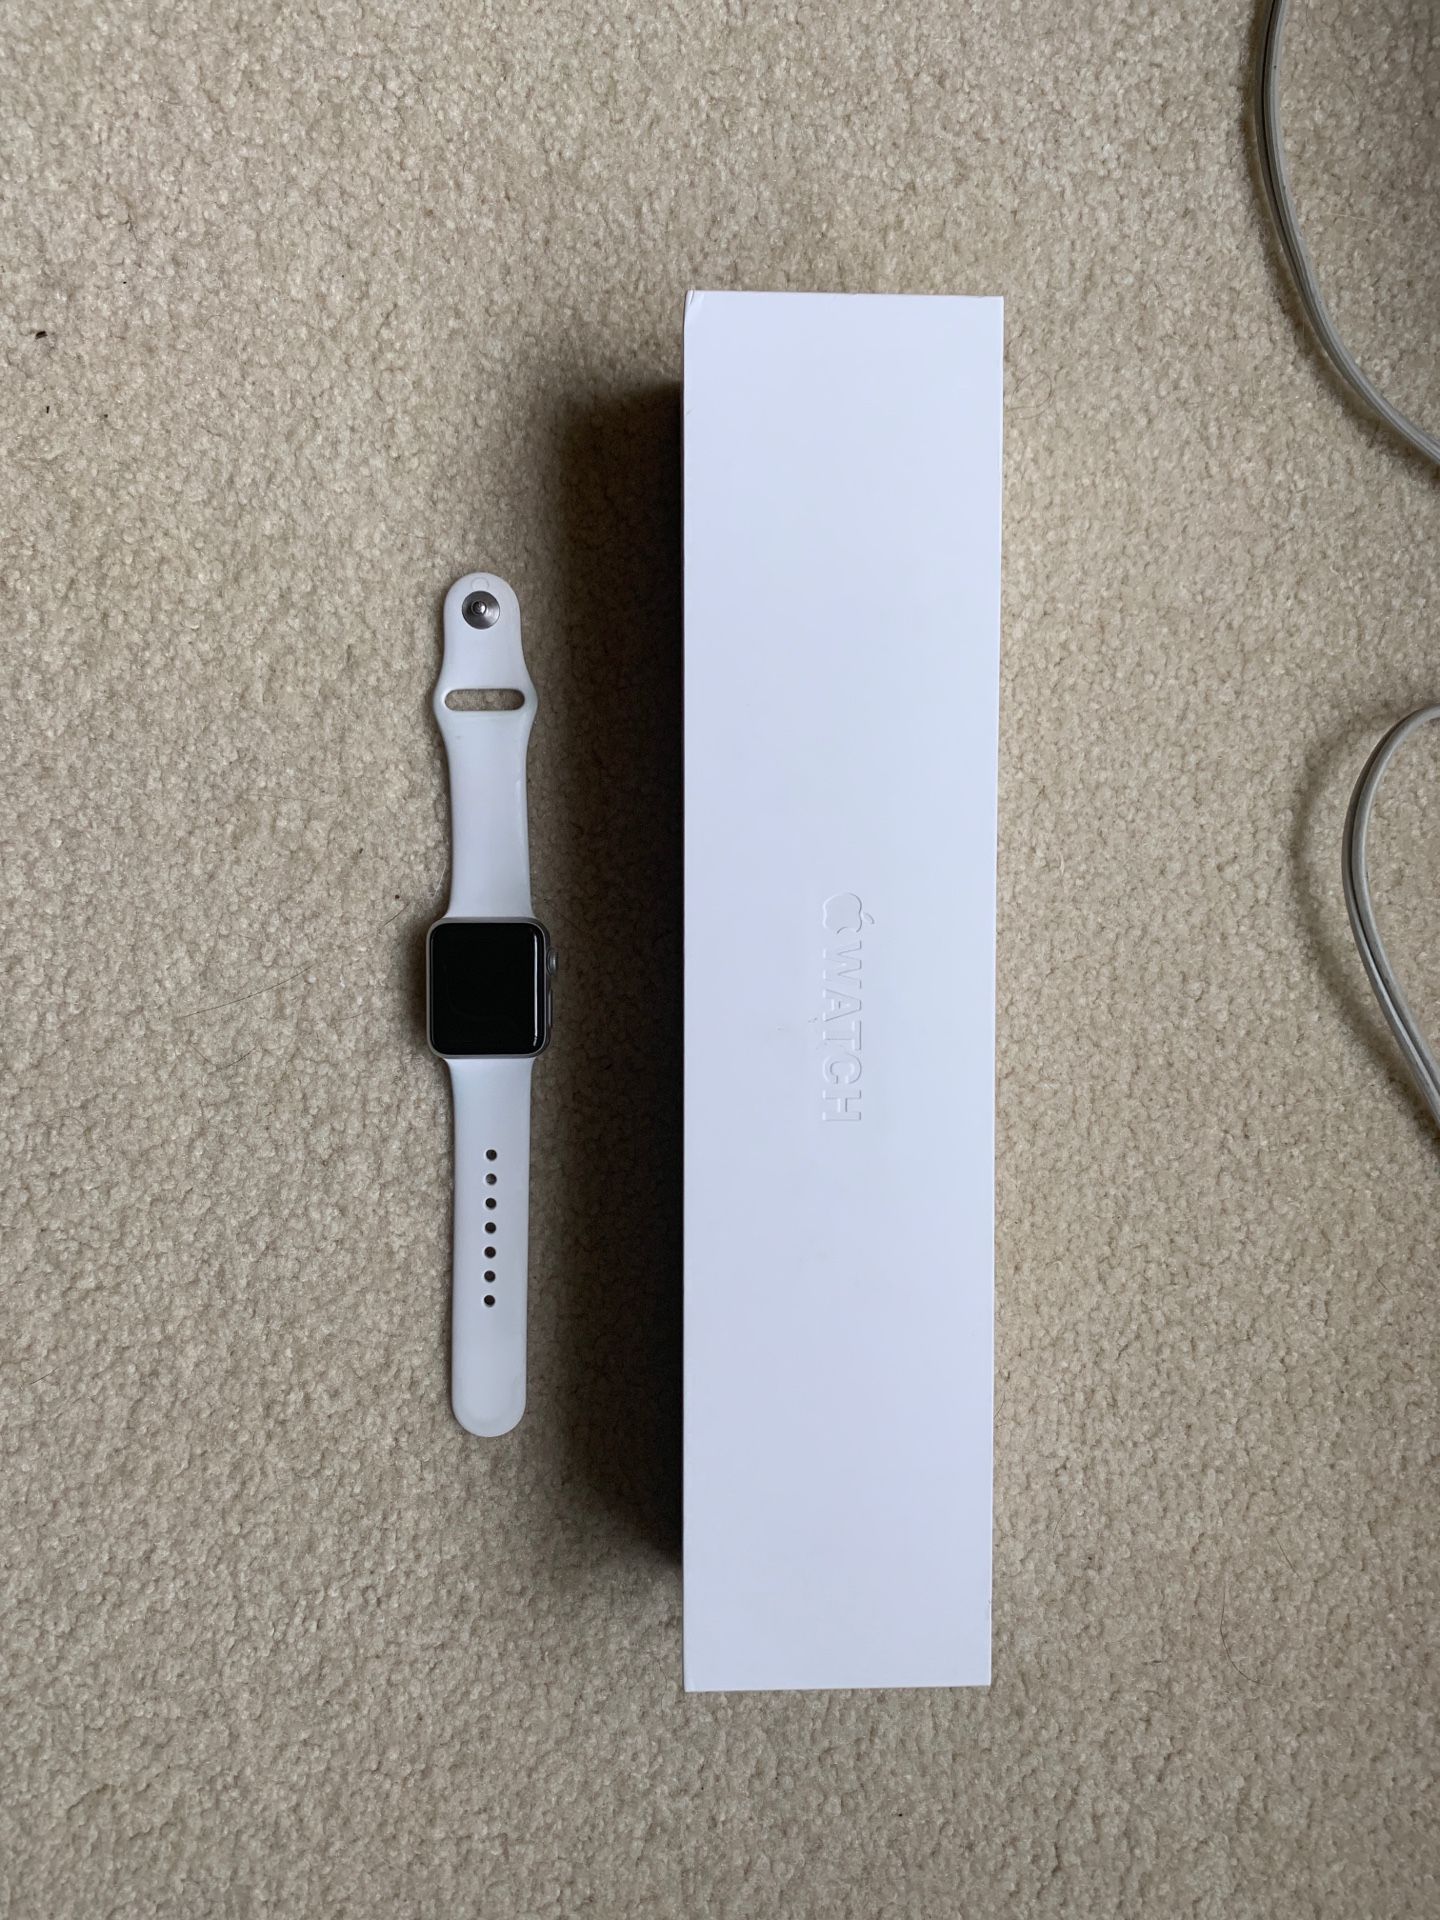 Apple Watch Series 2 38mm Silver - including box and accessories